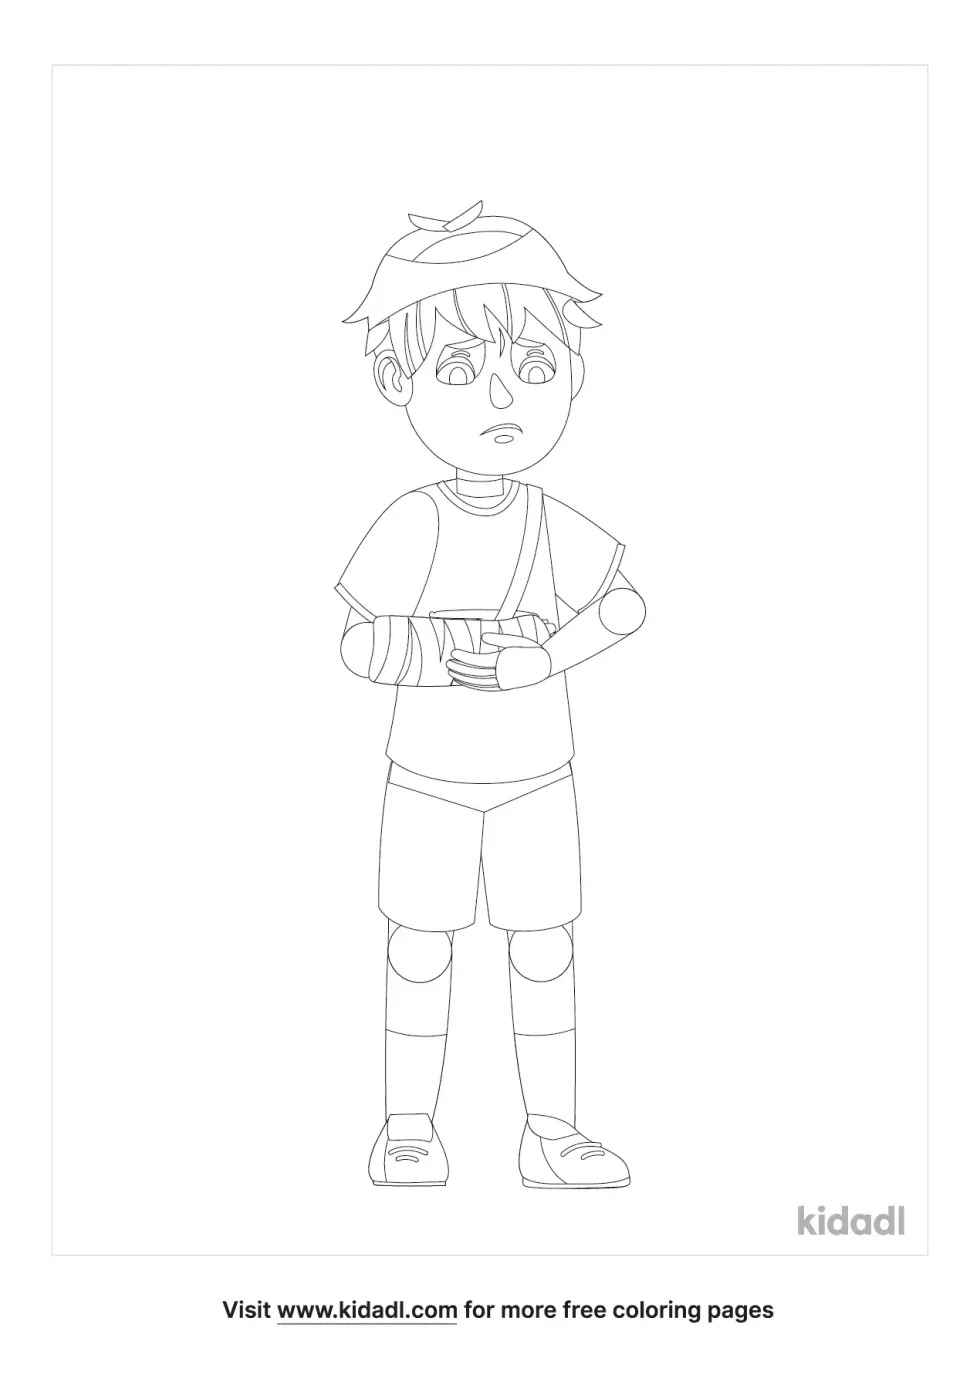 Child With A Broken Arm Coloring Page